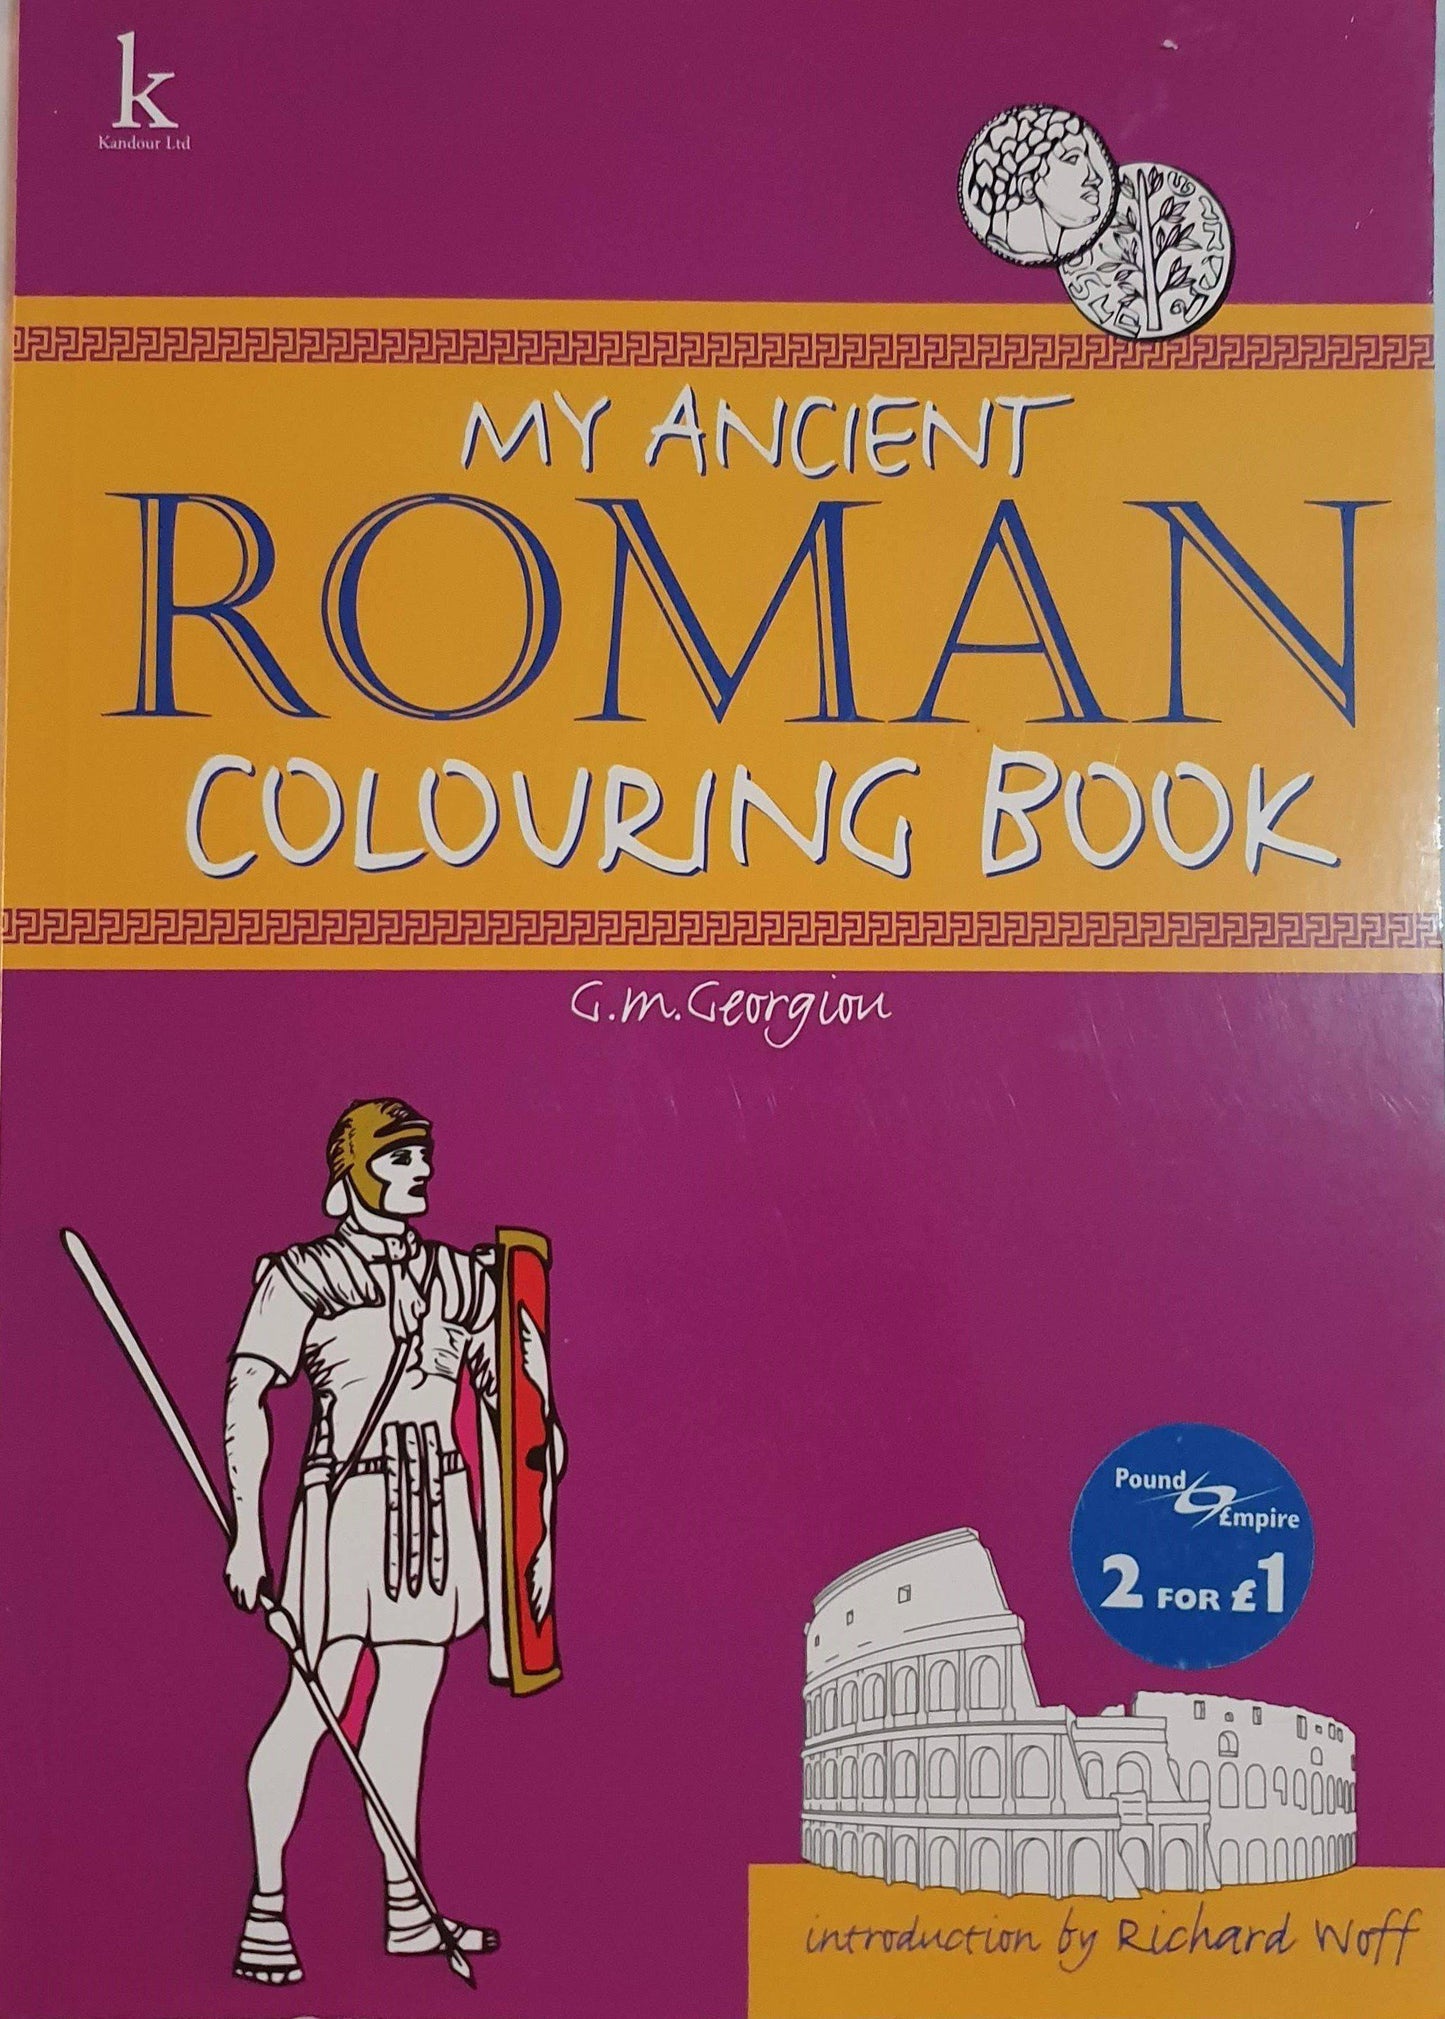 My Ancient Roman Colouring Book Like New Recuddles.ch  (6235114668217)